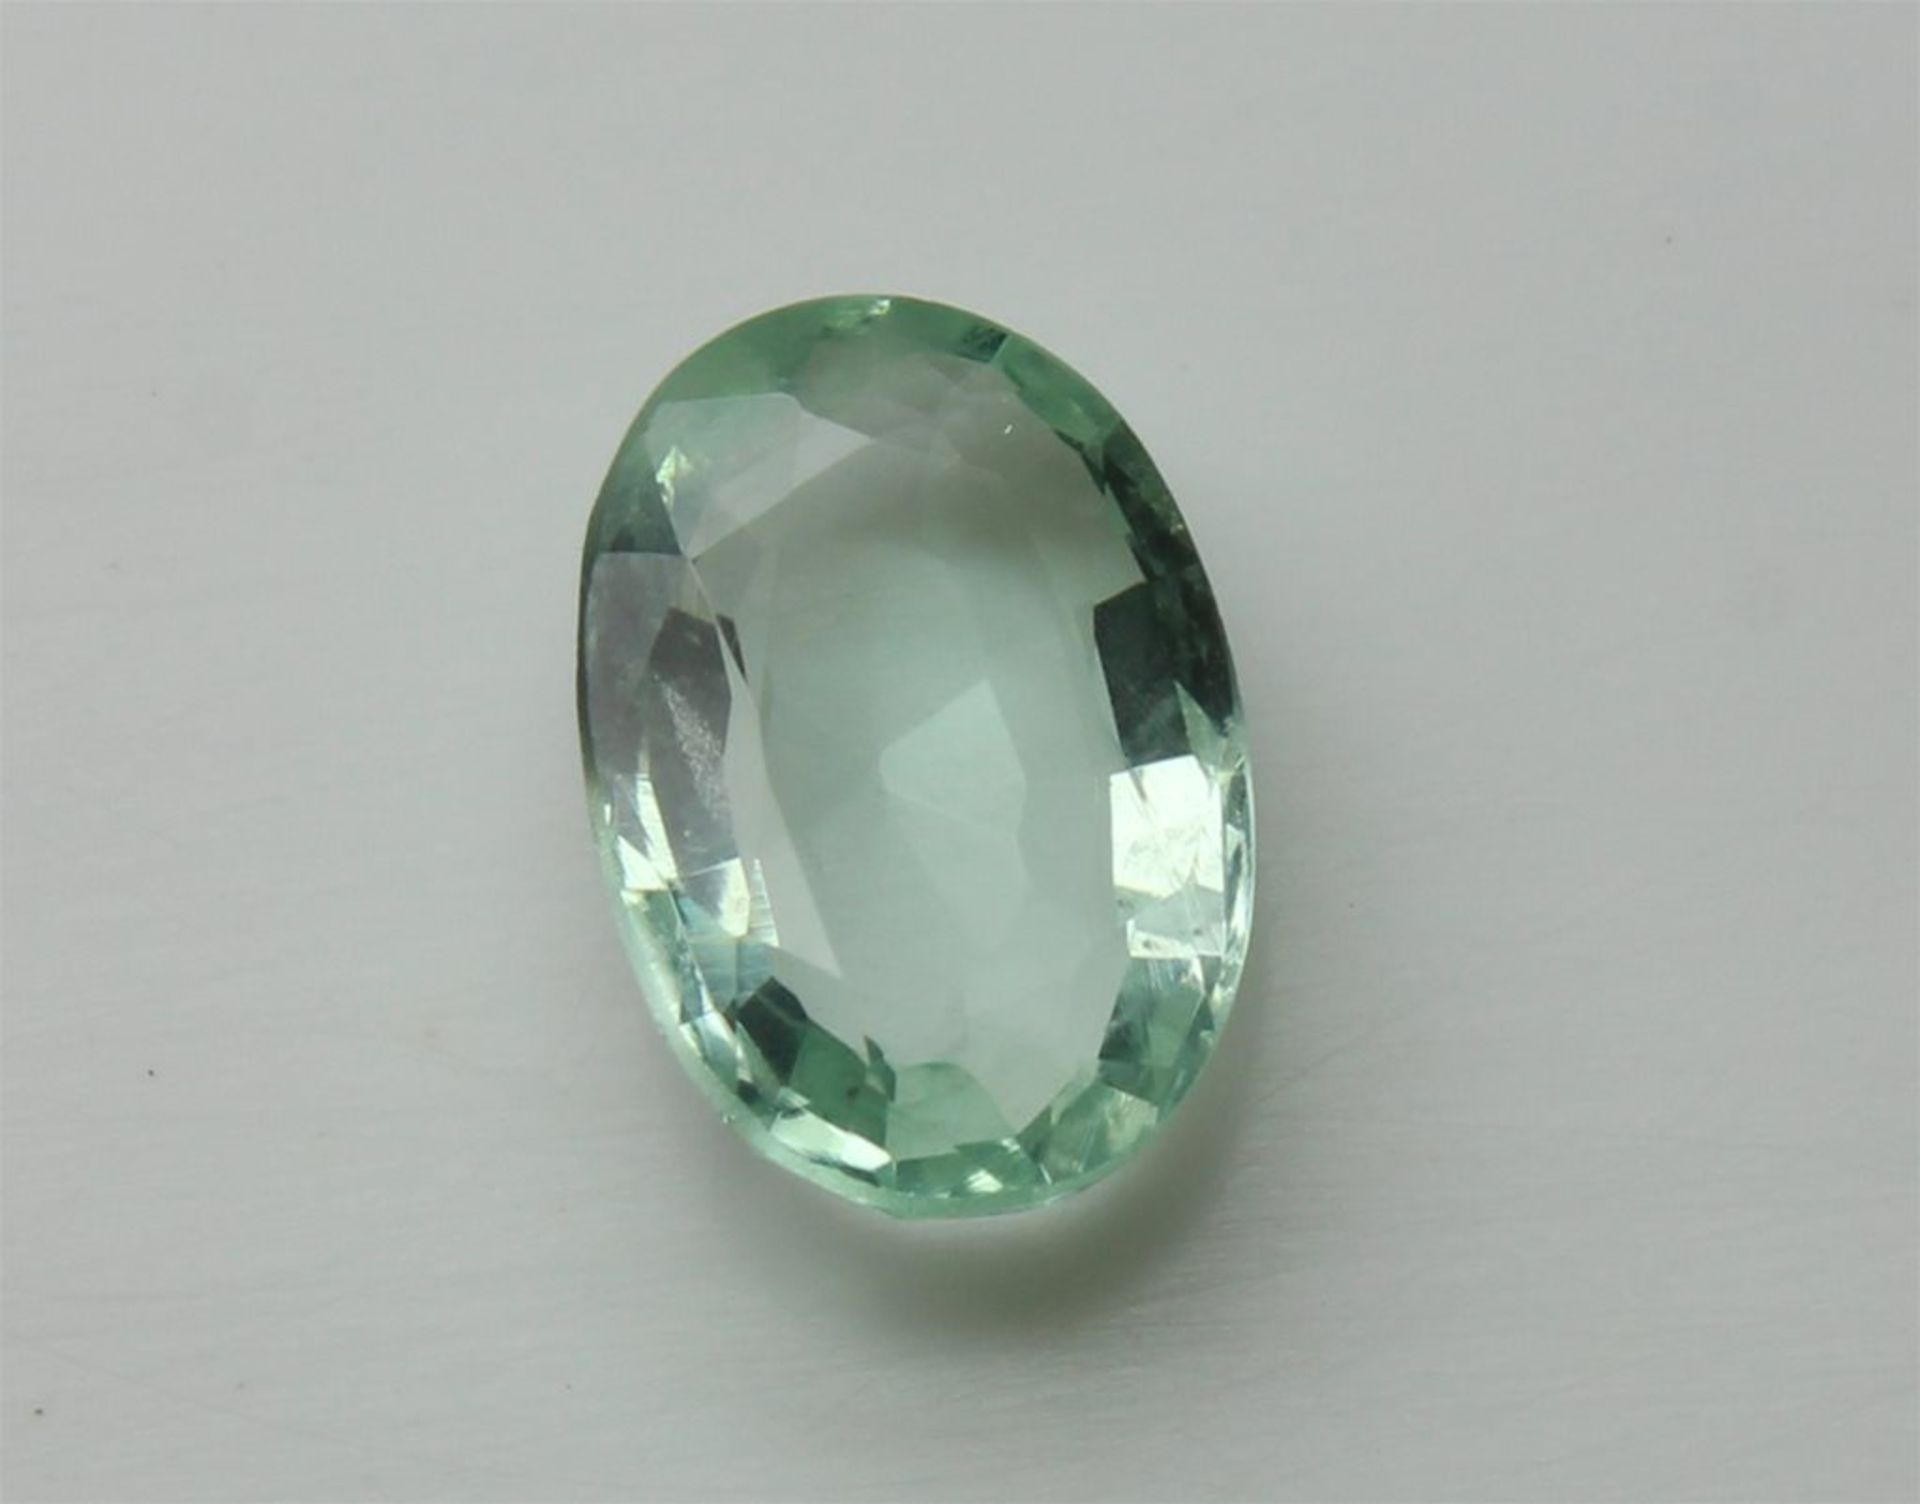 NO RESERVE - 1.09 Ct Emerald With IGI Certificate - Image 2 of 5